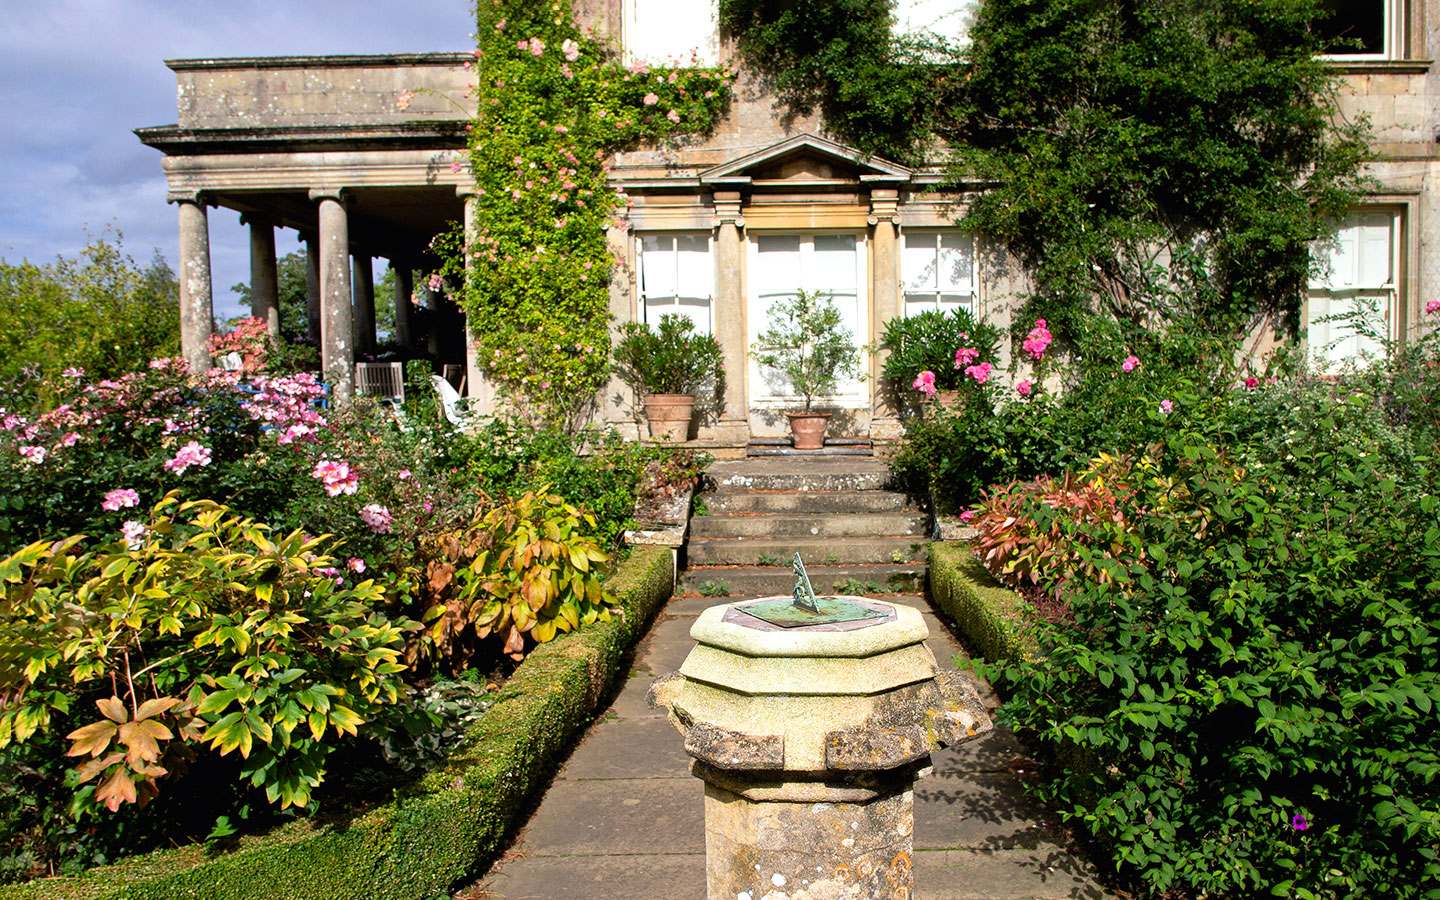 Kiftsgate Court Gardens, one of the top things to do in Chipping Campden